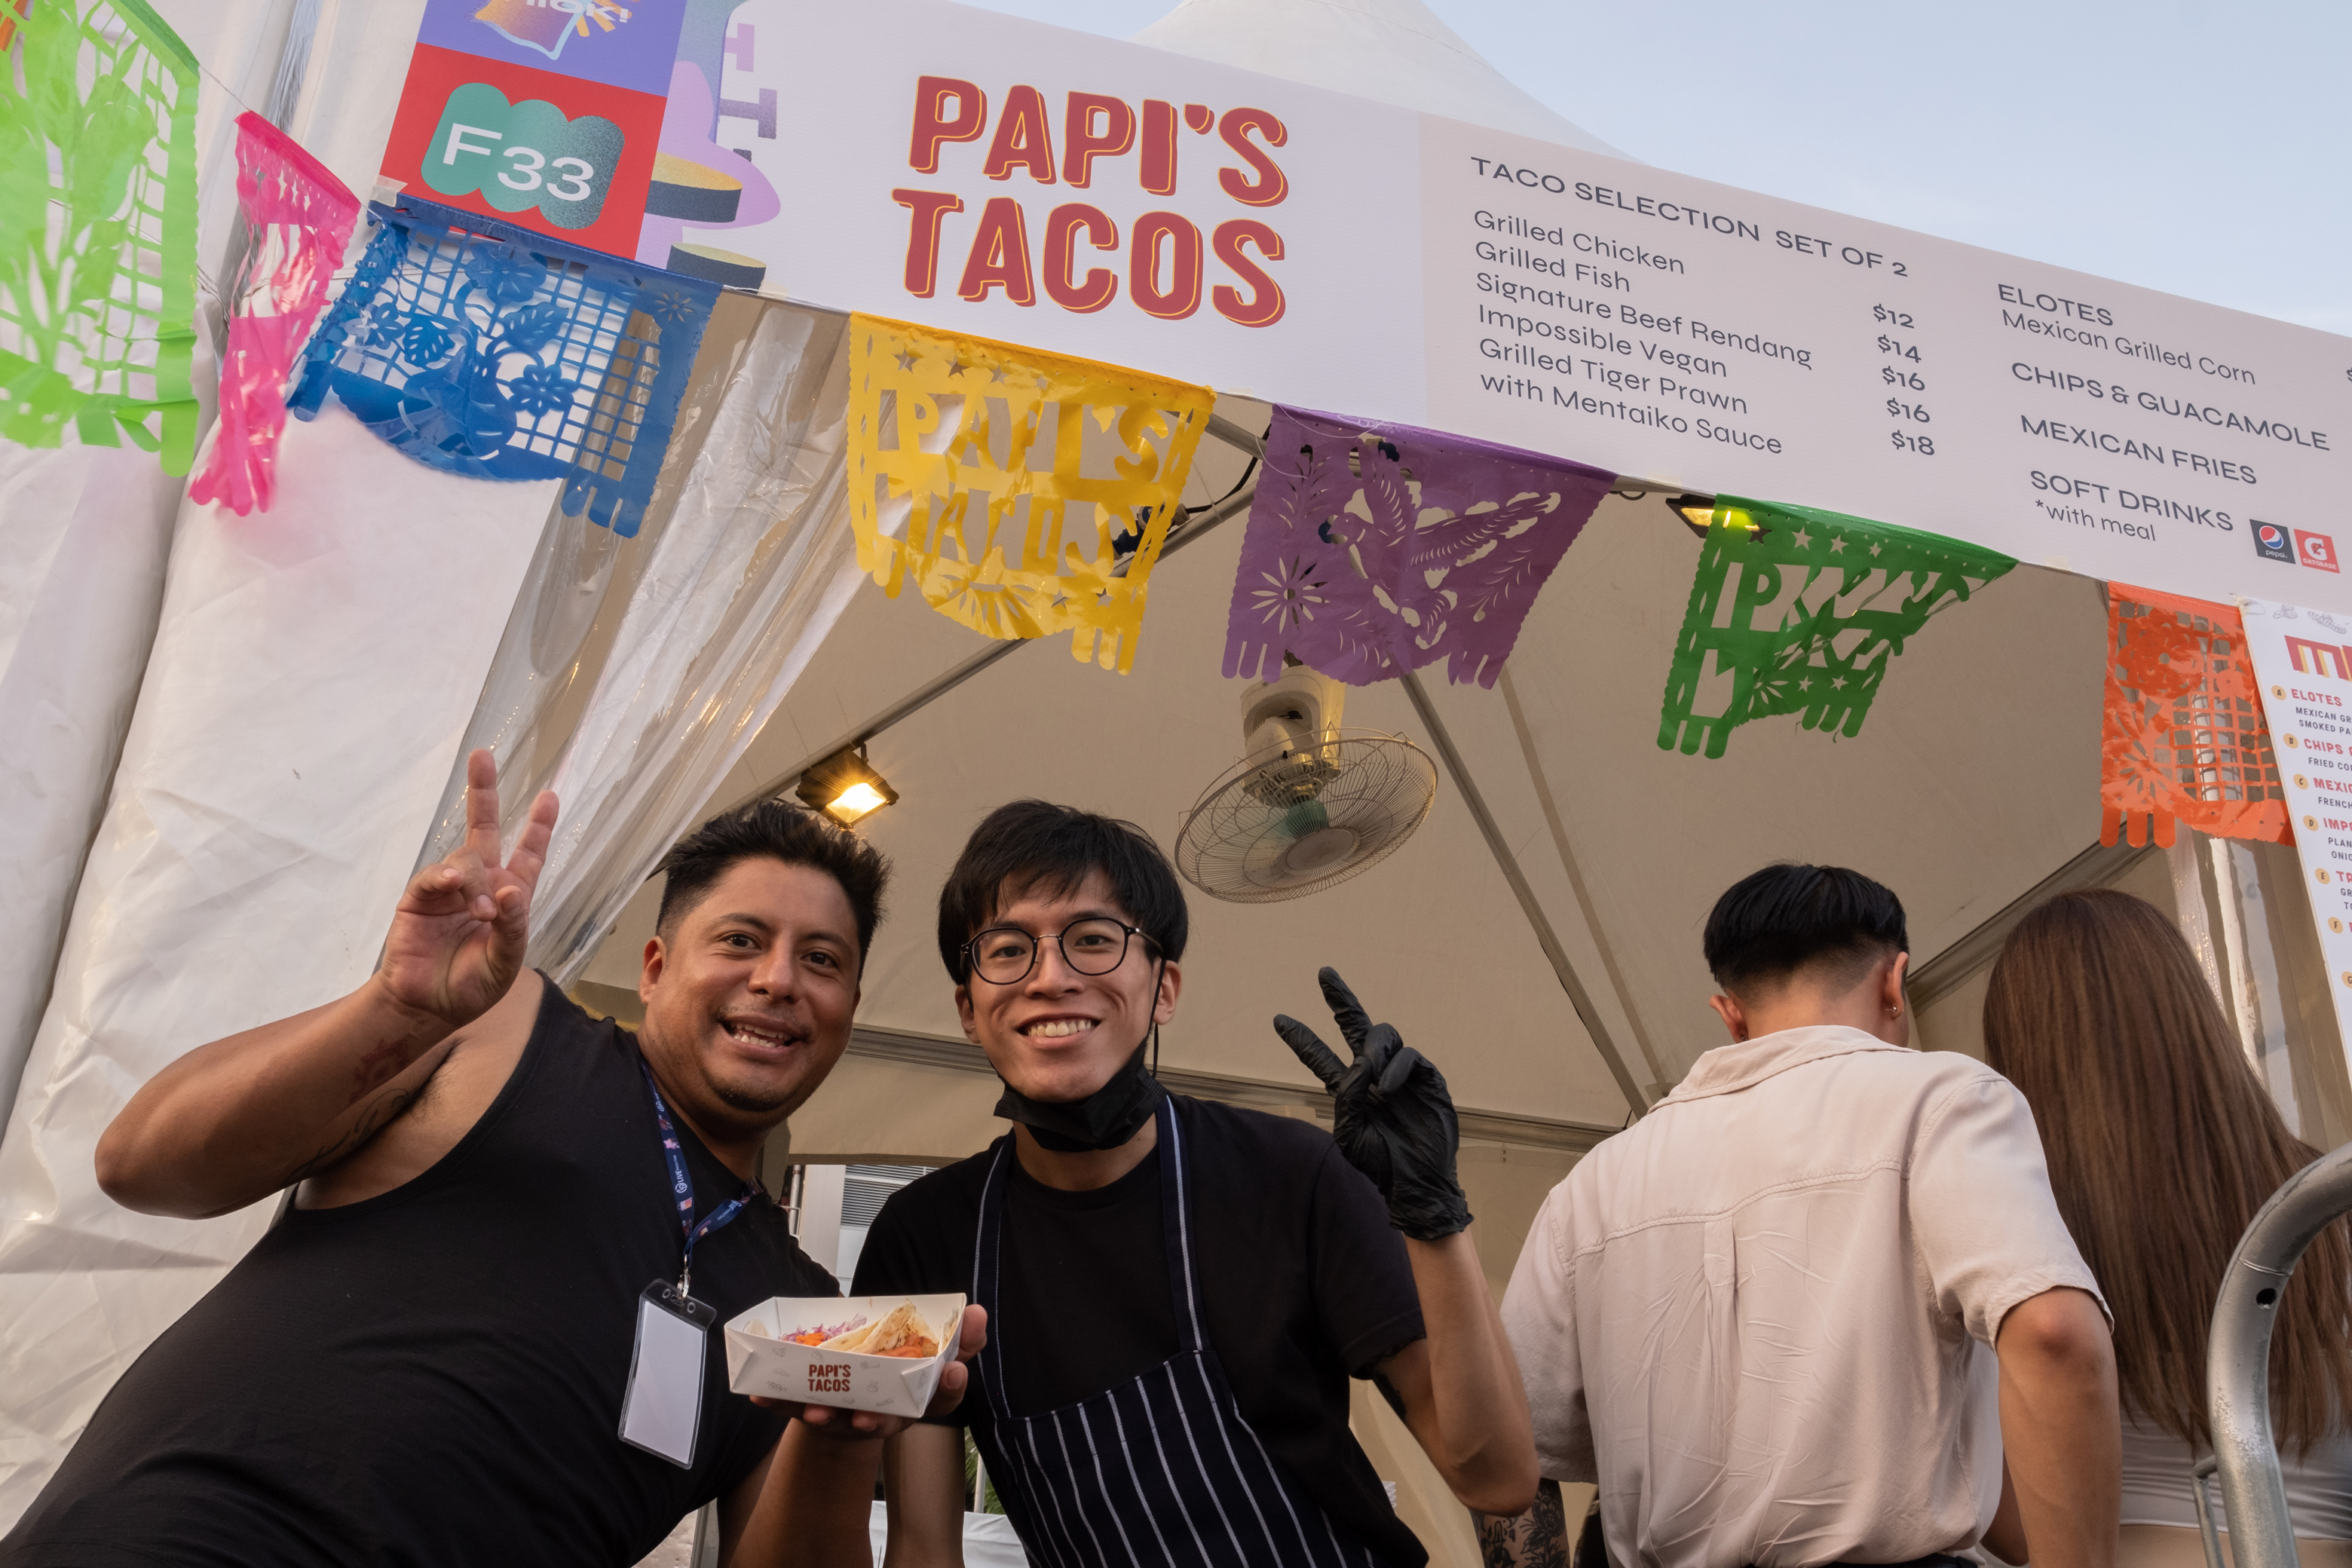 Head chef and owner of Papi’s Taco, Mauricio Espinoza (left) posing with one of his chefs.